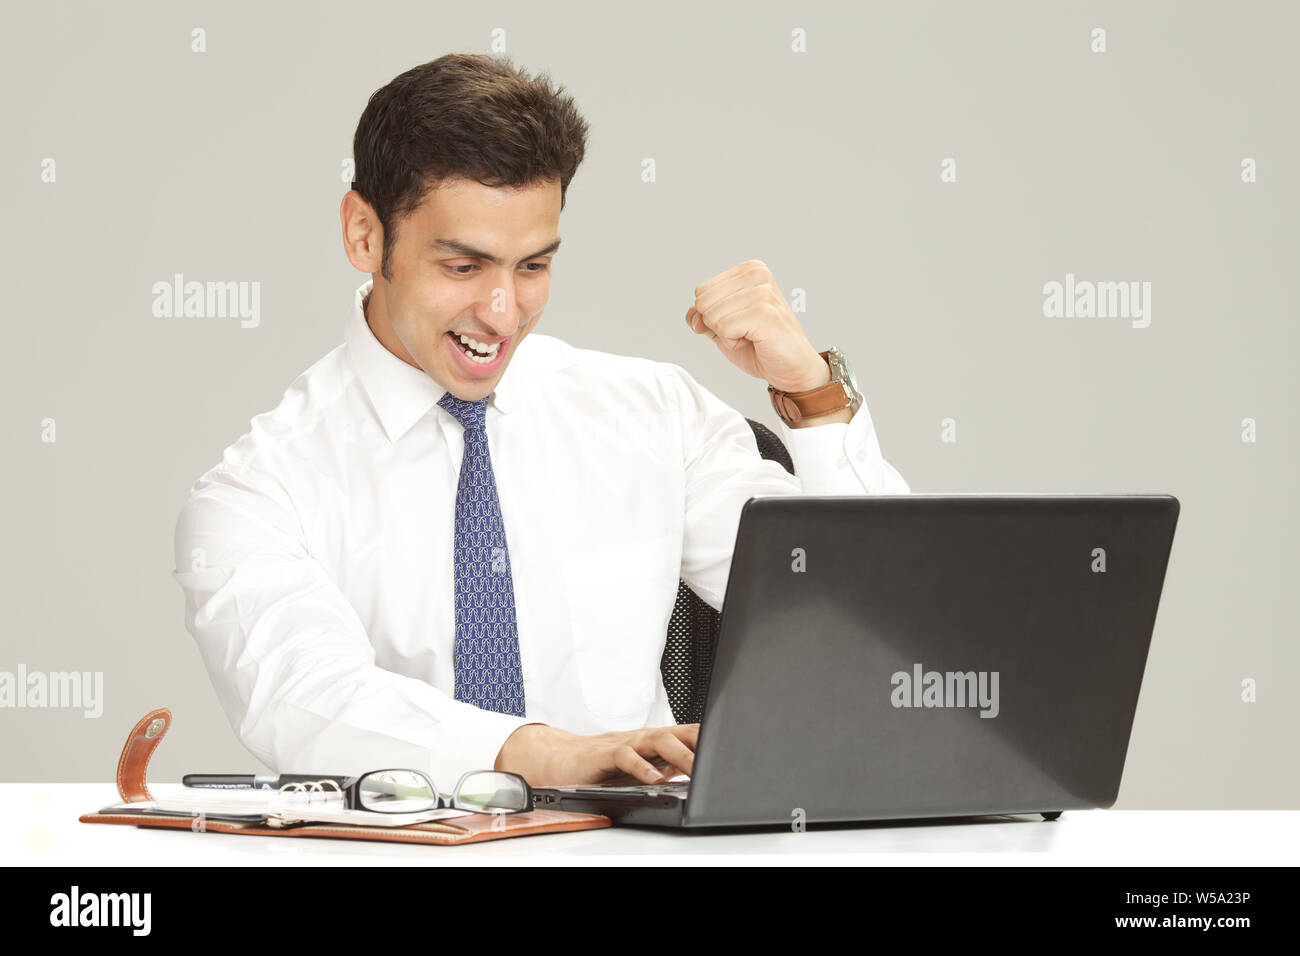 Businessman working on a laptop Stock Photo